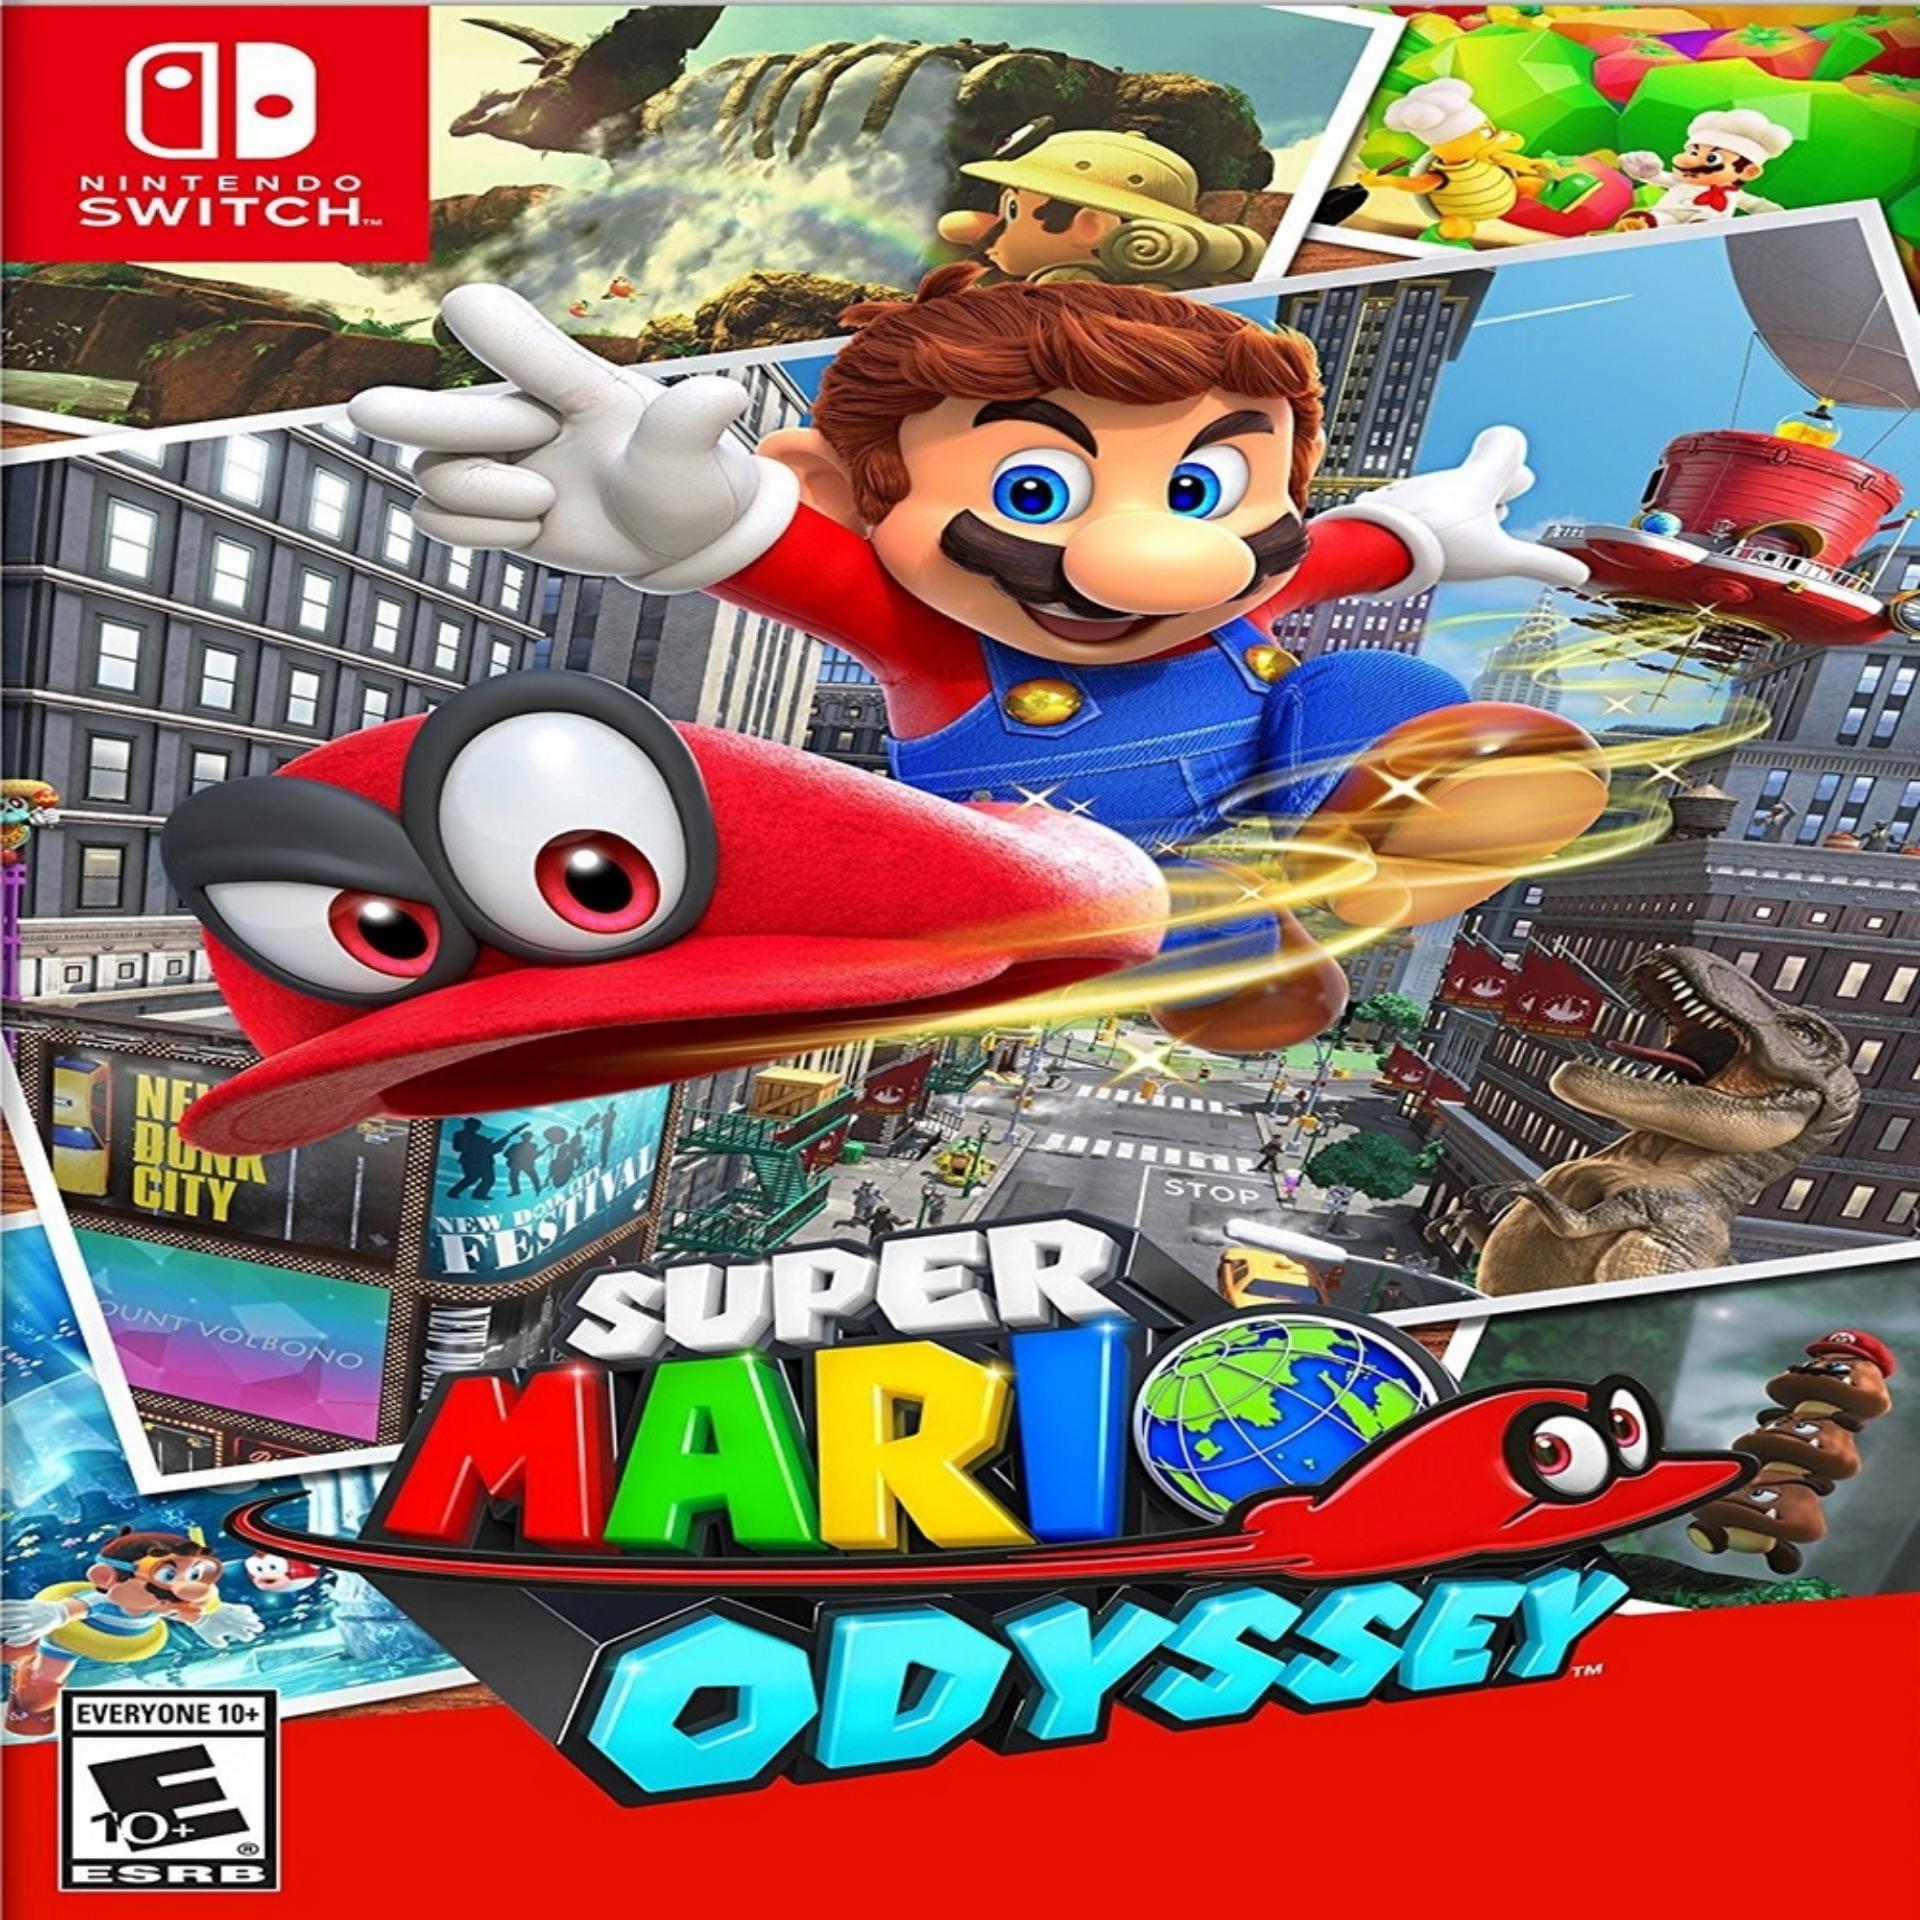 Thẻ Game Switch - Super Mario Odyssey